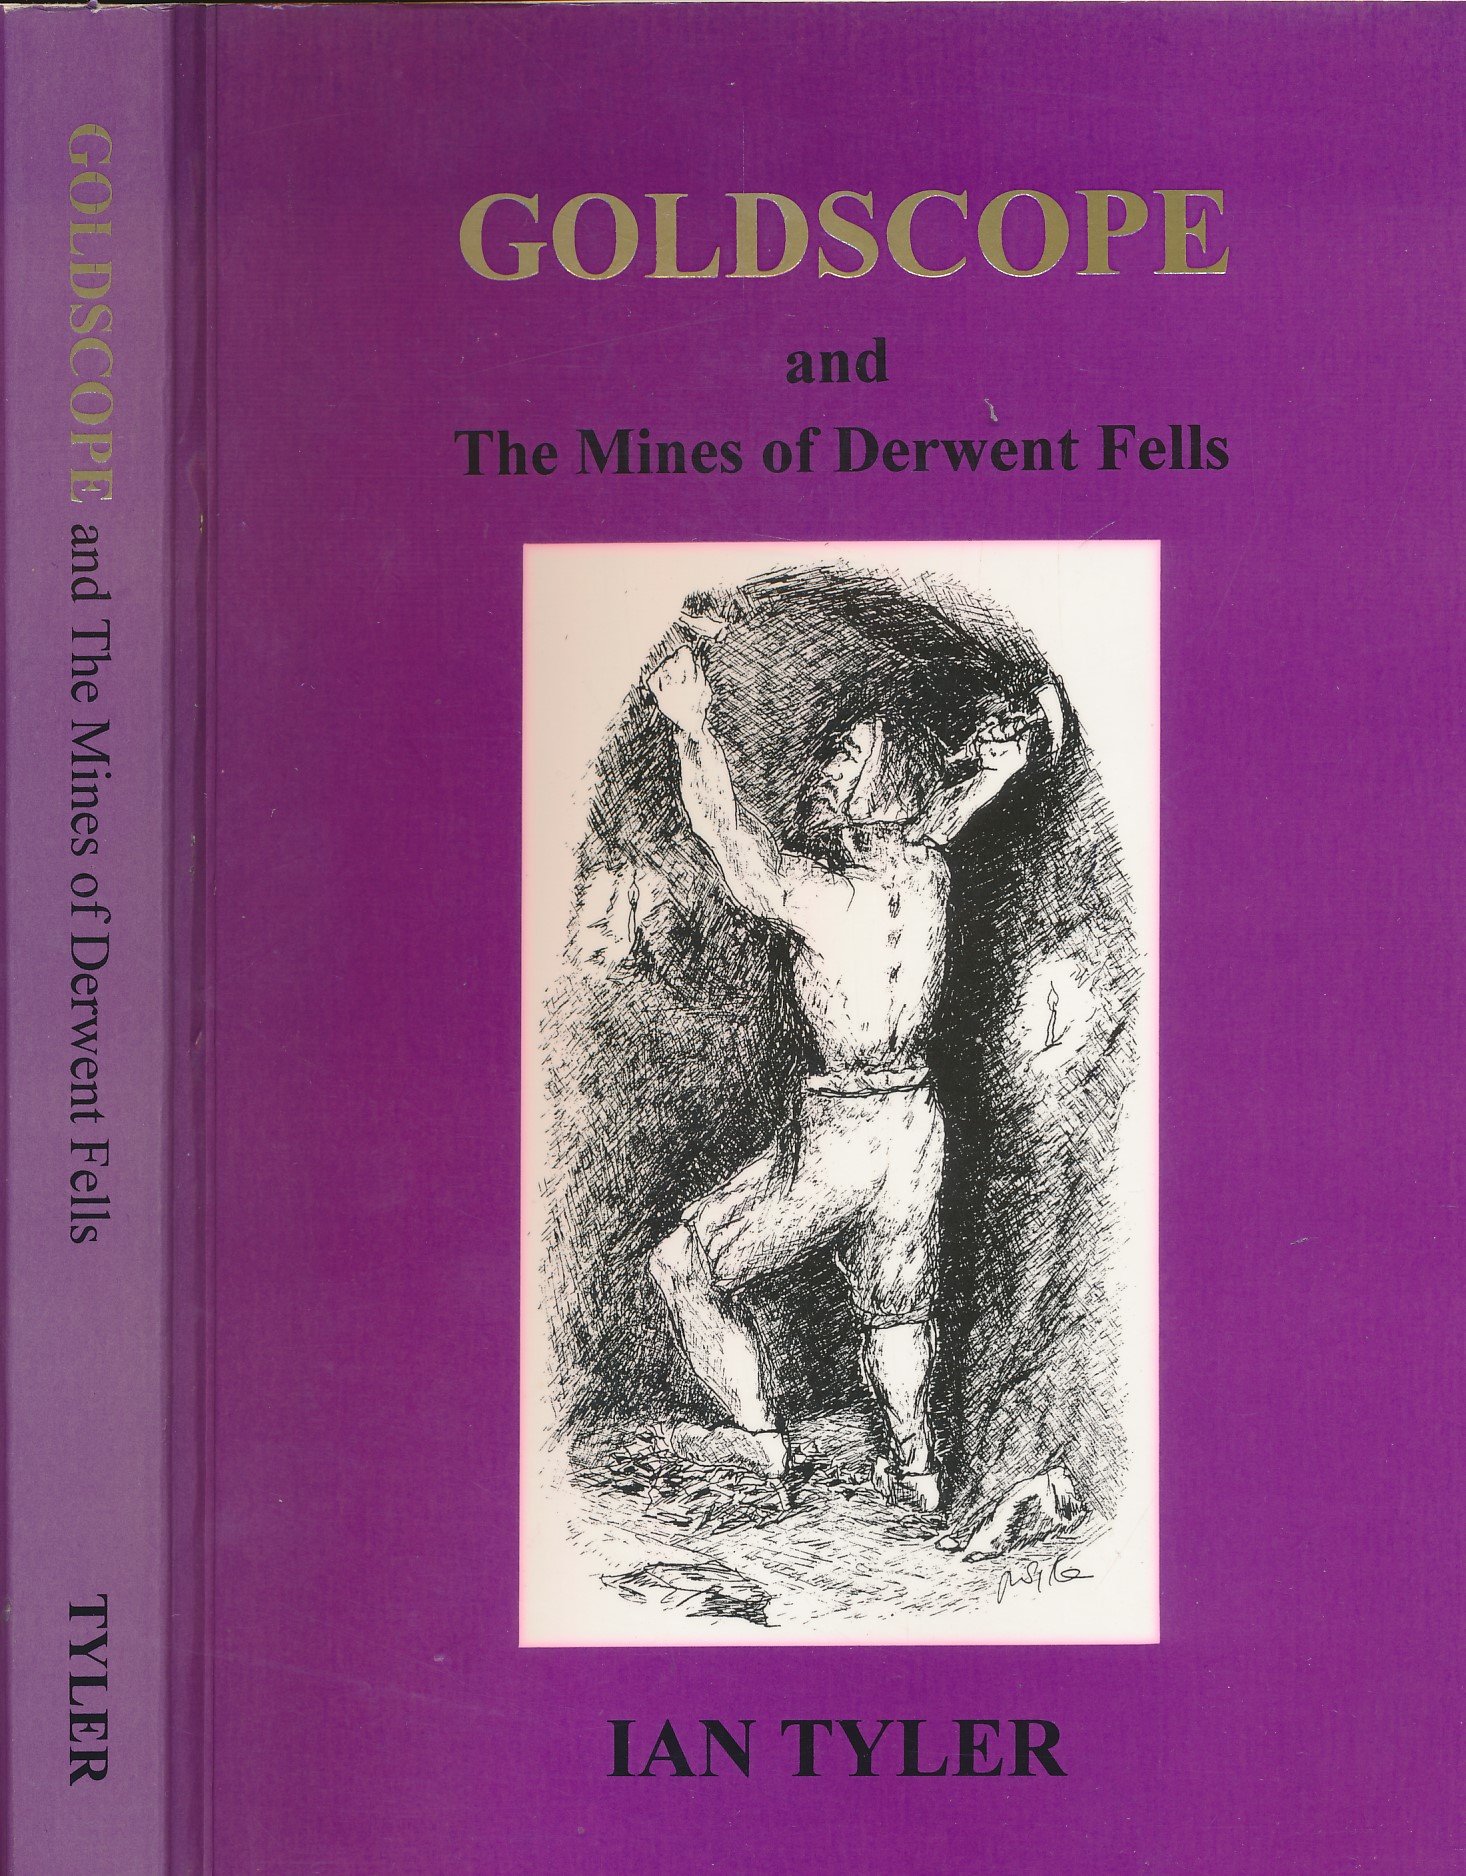 Goldscope and the Mines of Derwent Falls